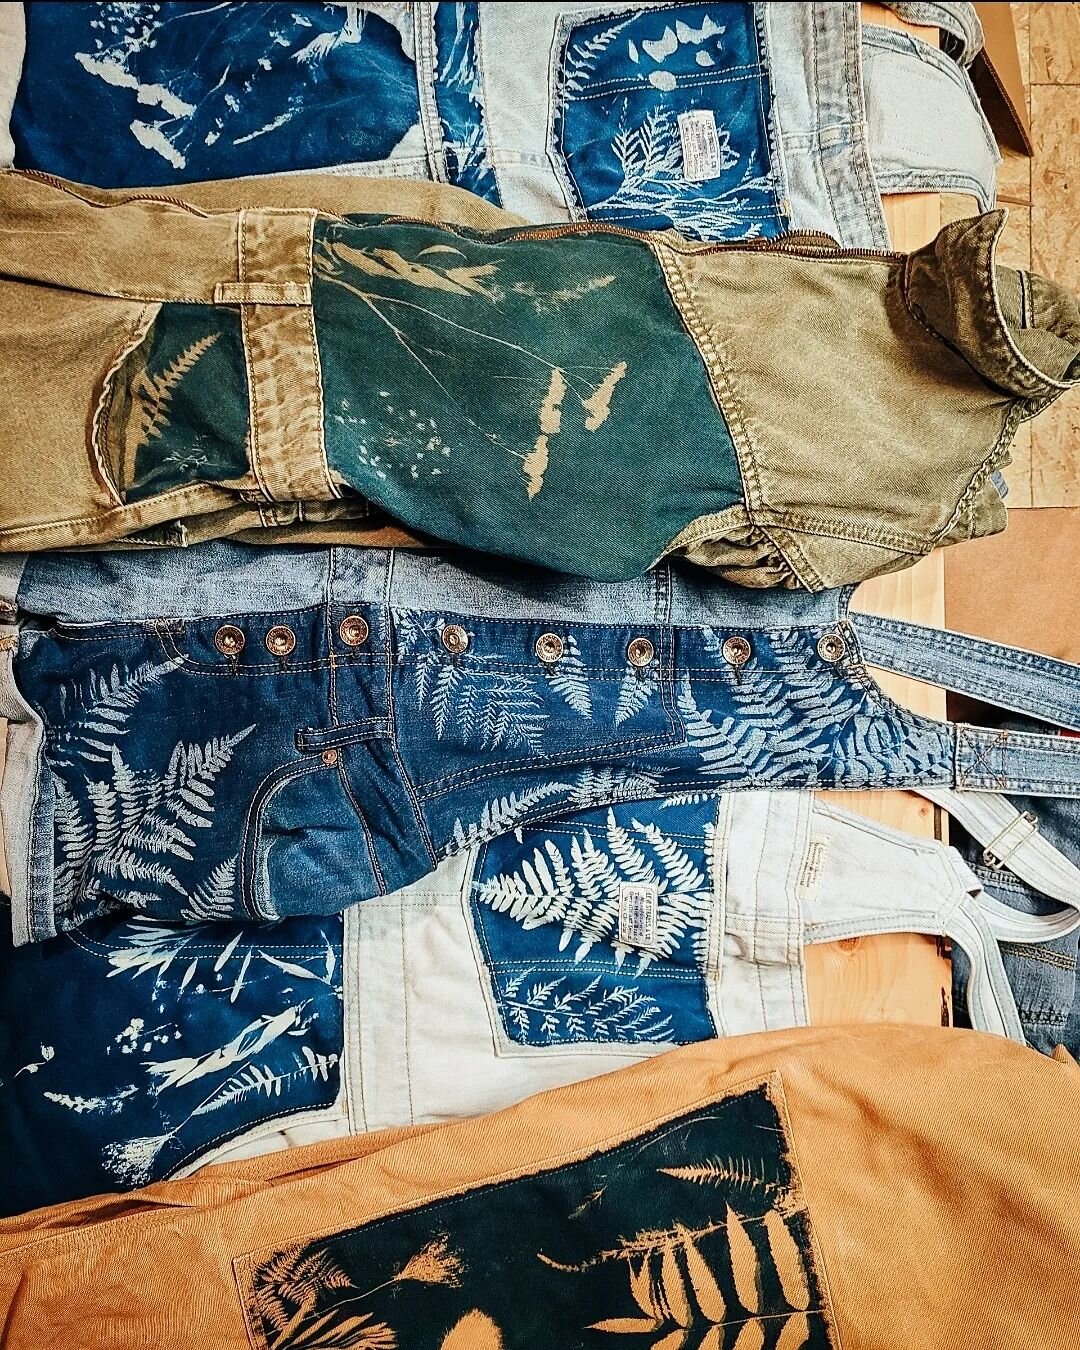 SHOP UPDATE happening on March 23rd at 7pm. (it is my mom's birthday so it has to be a good day)

There will be new sunprinted thrifted clothing. Each piece is unique and printed  with botanicals collected from my own backyard. Because all the clothi